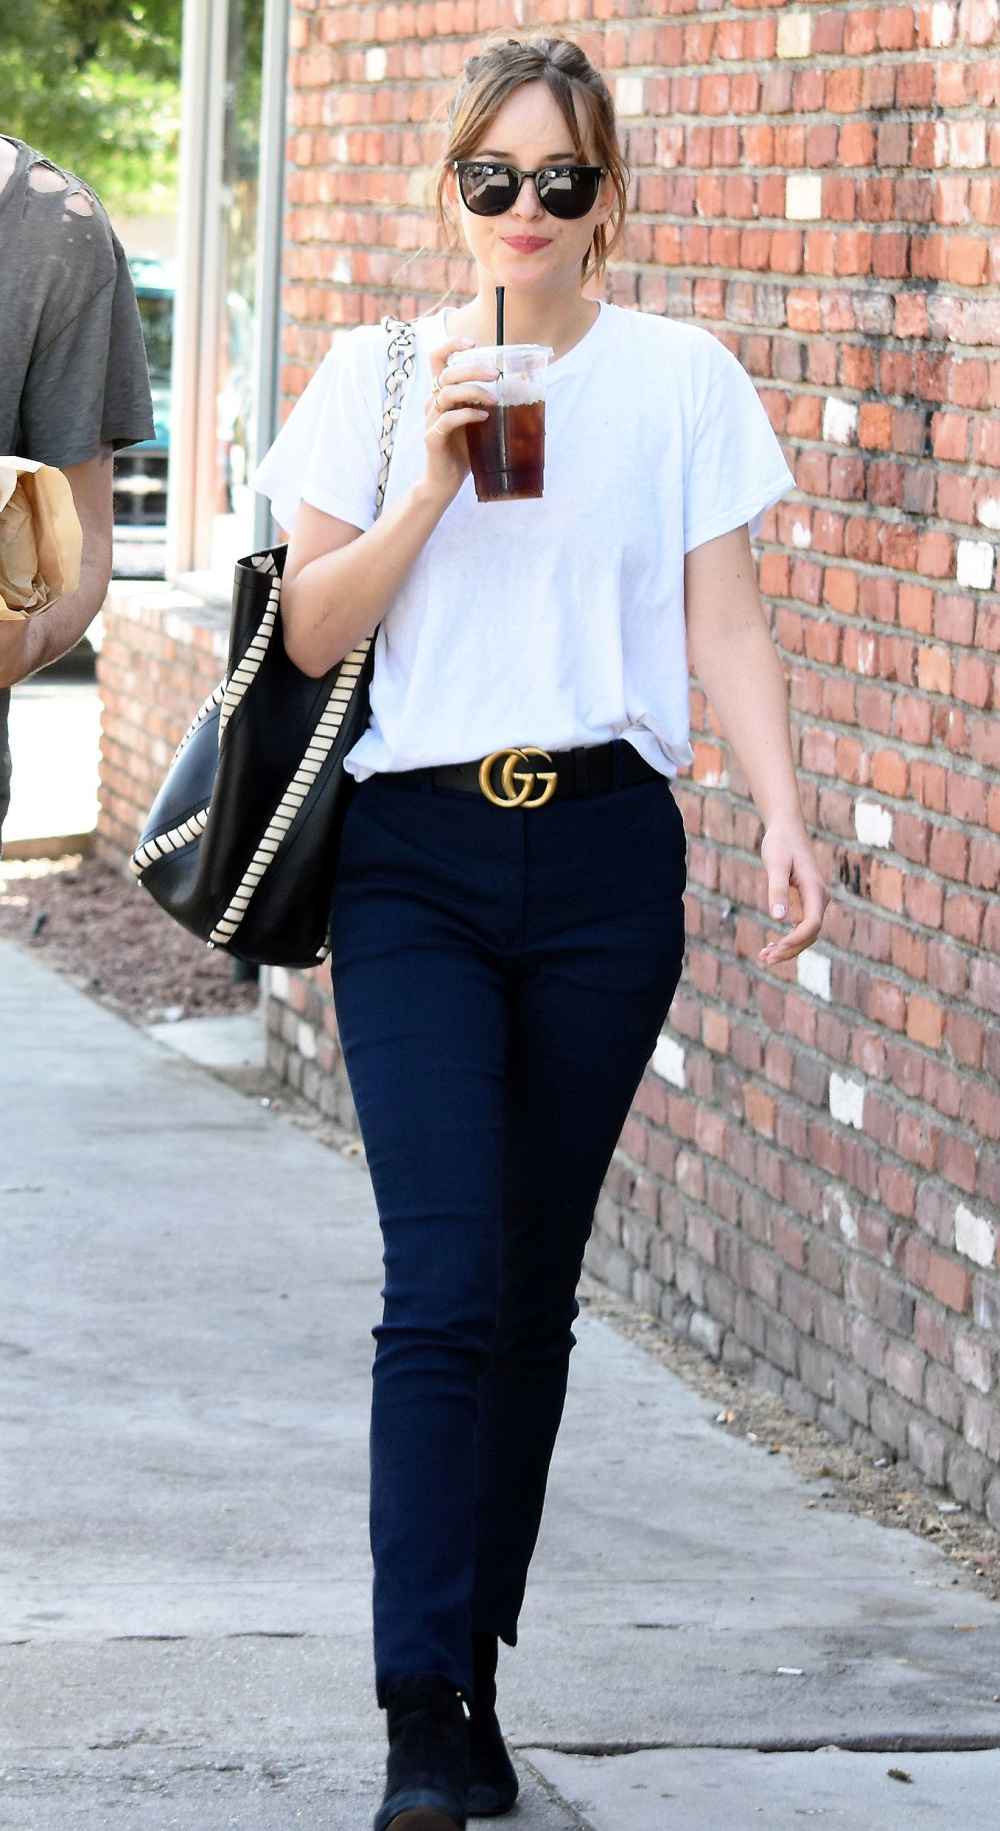 Kendall J. and More Cinch Street Styles With Gucci Belts